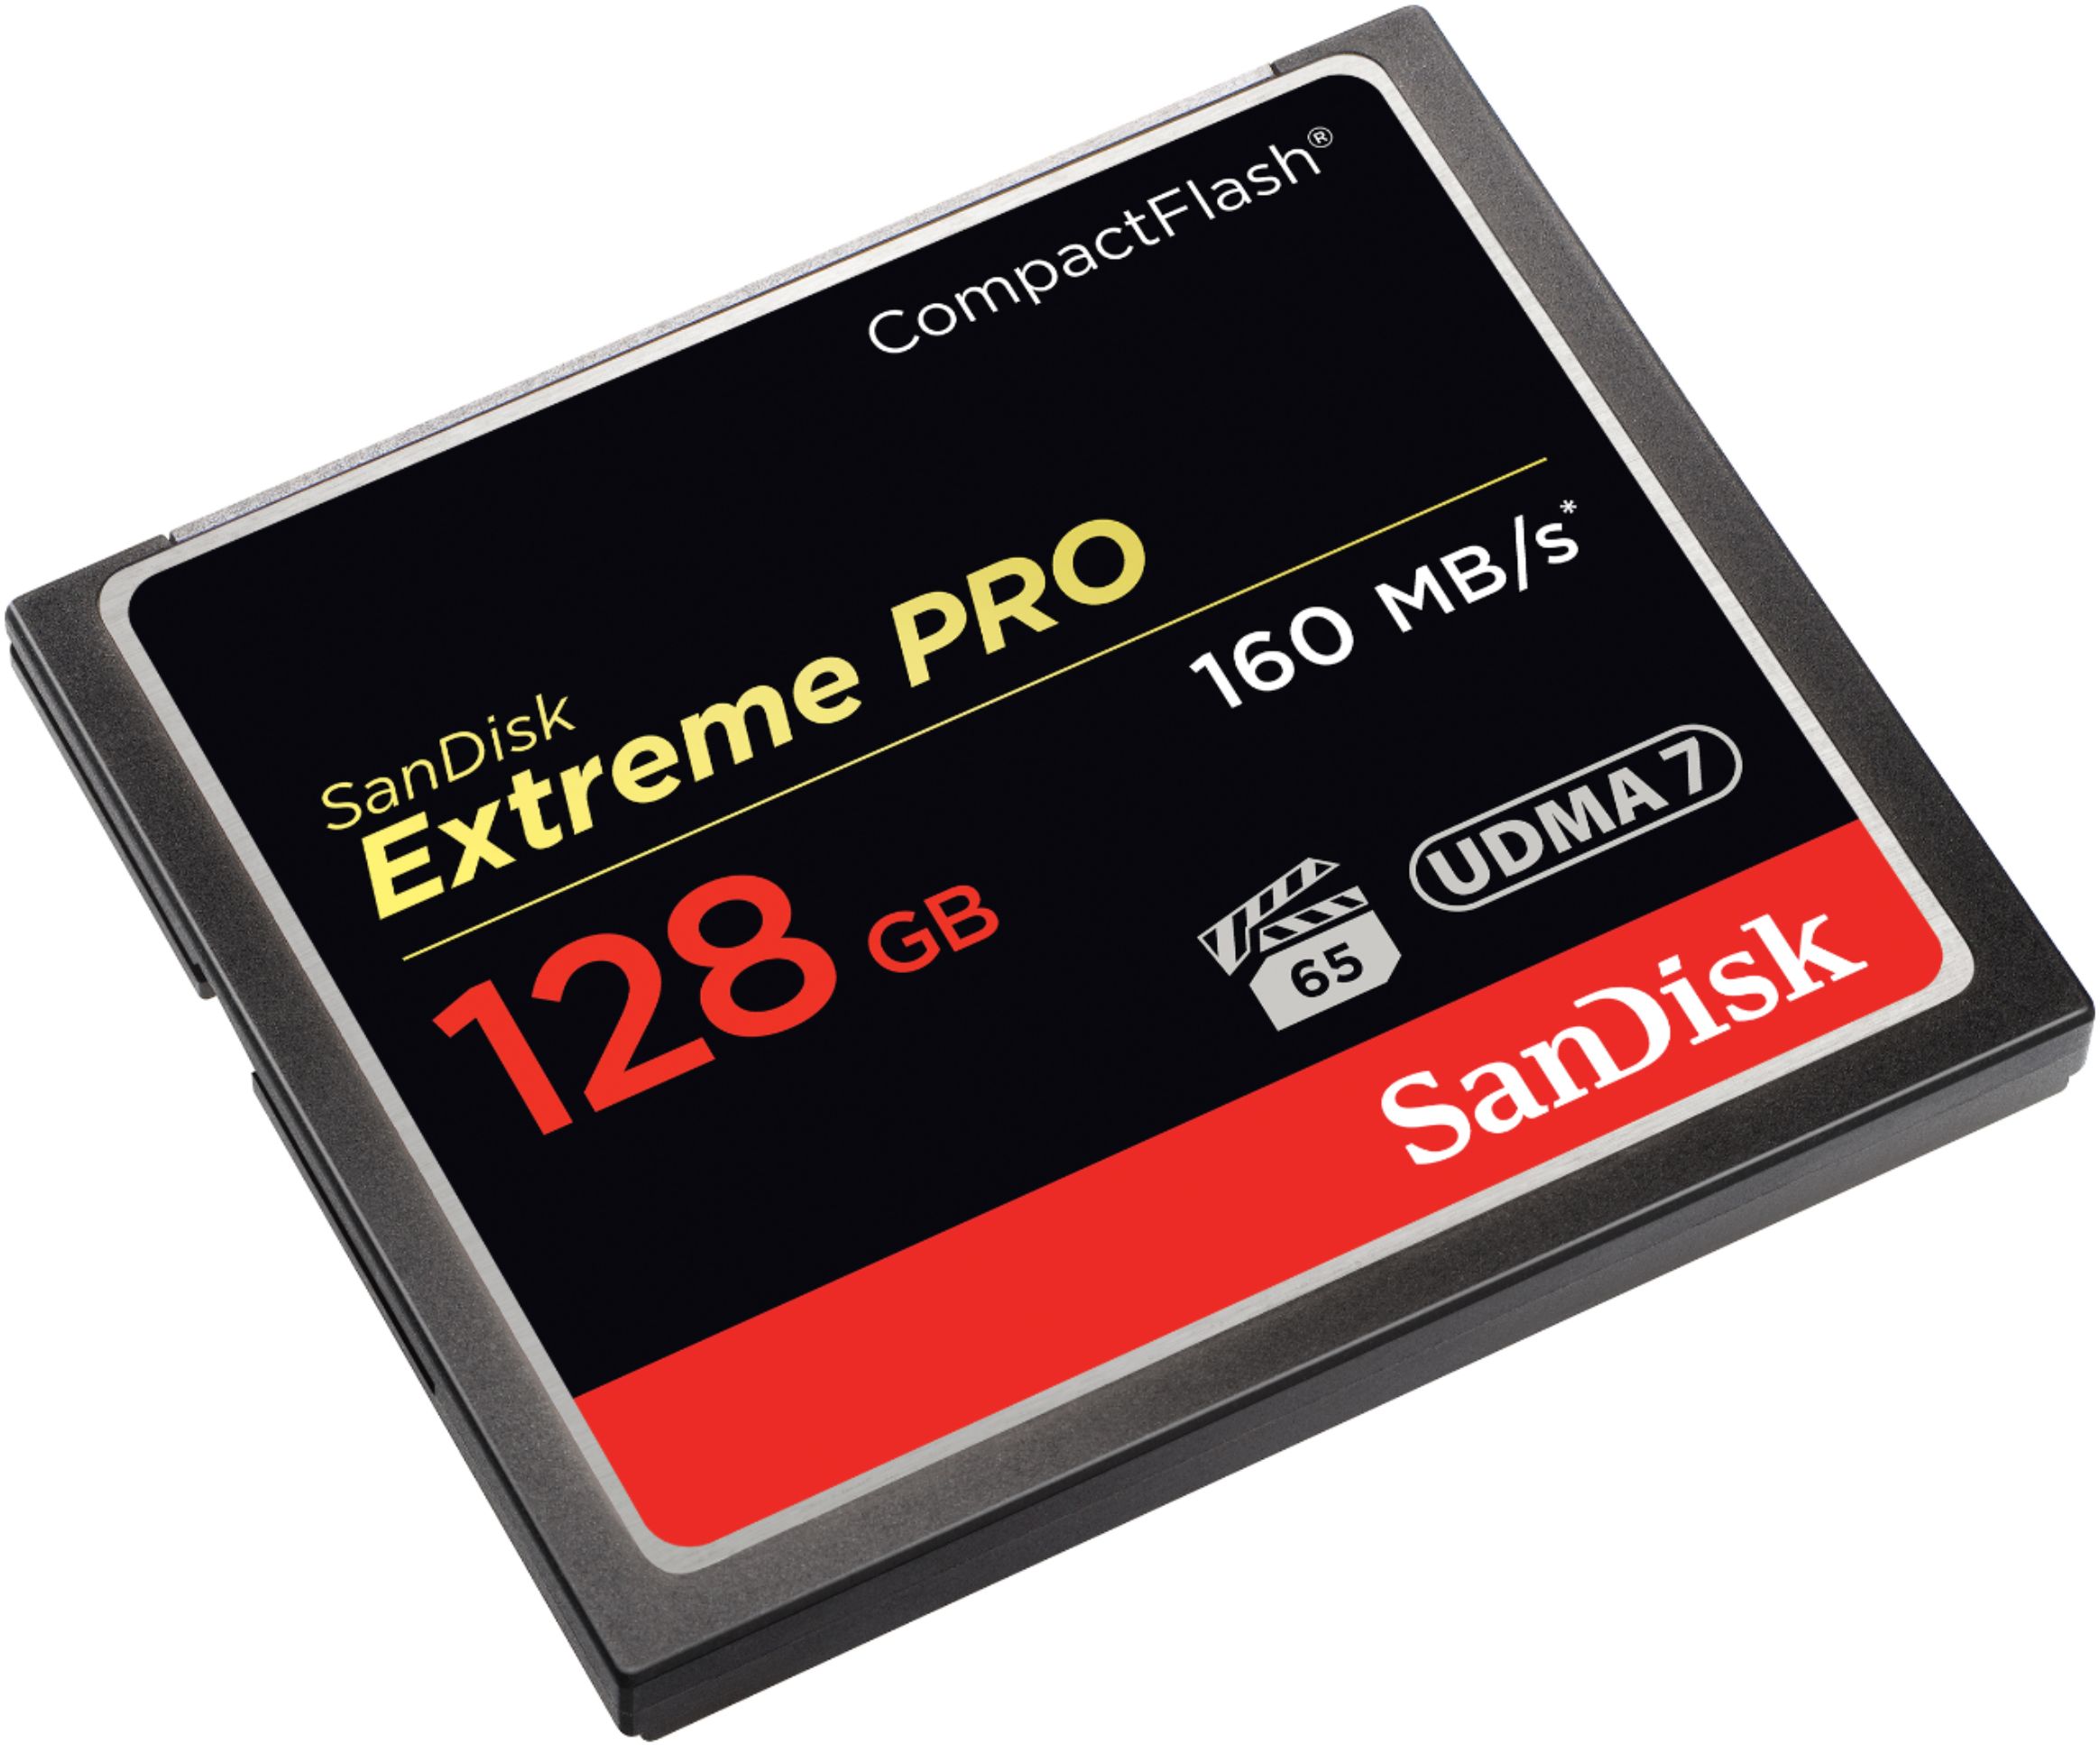 SanDisk 128GB Extreme PRO CFexpress Memory Card SDCFE-128G-ANCNN - Best Buy